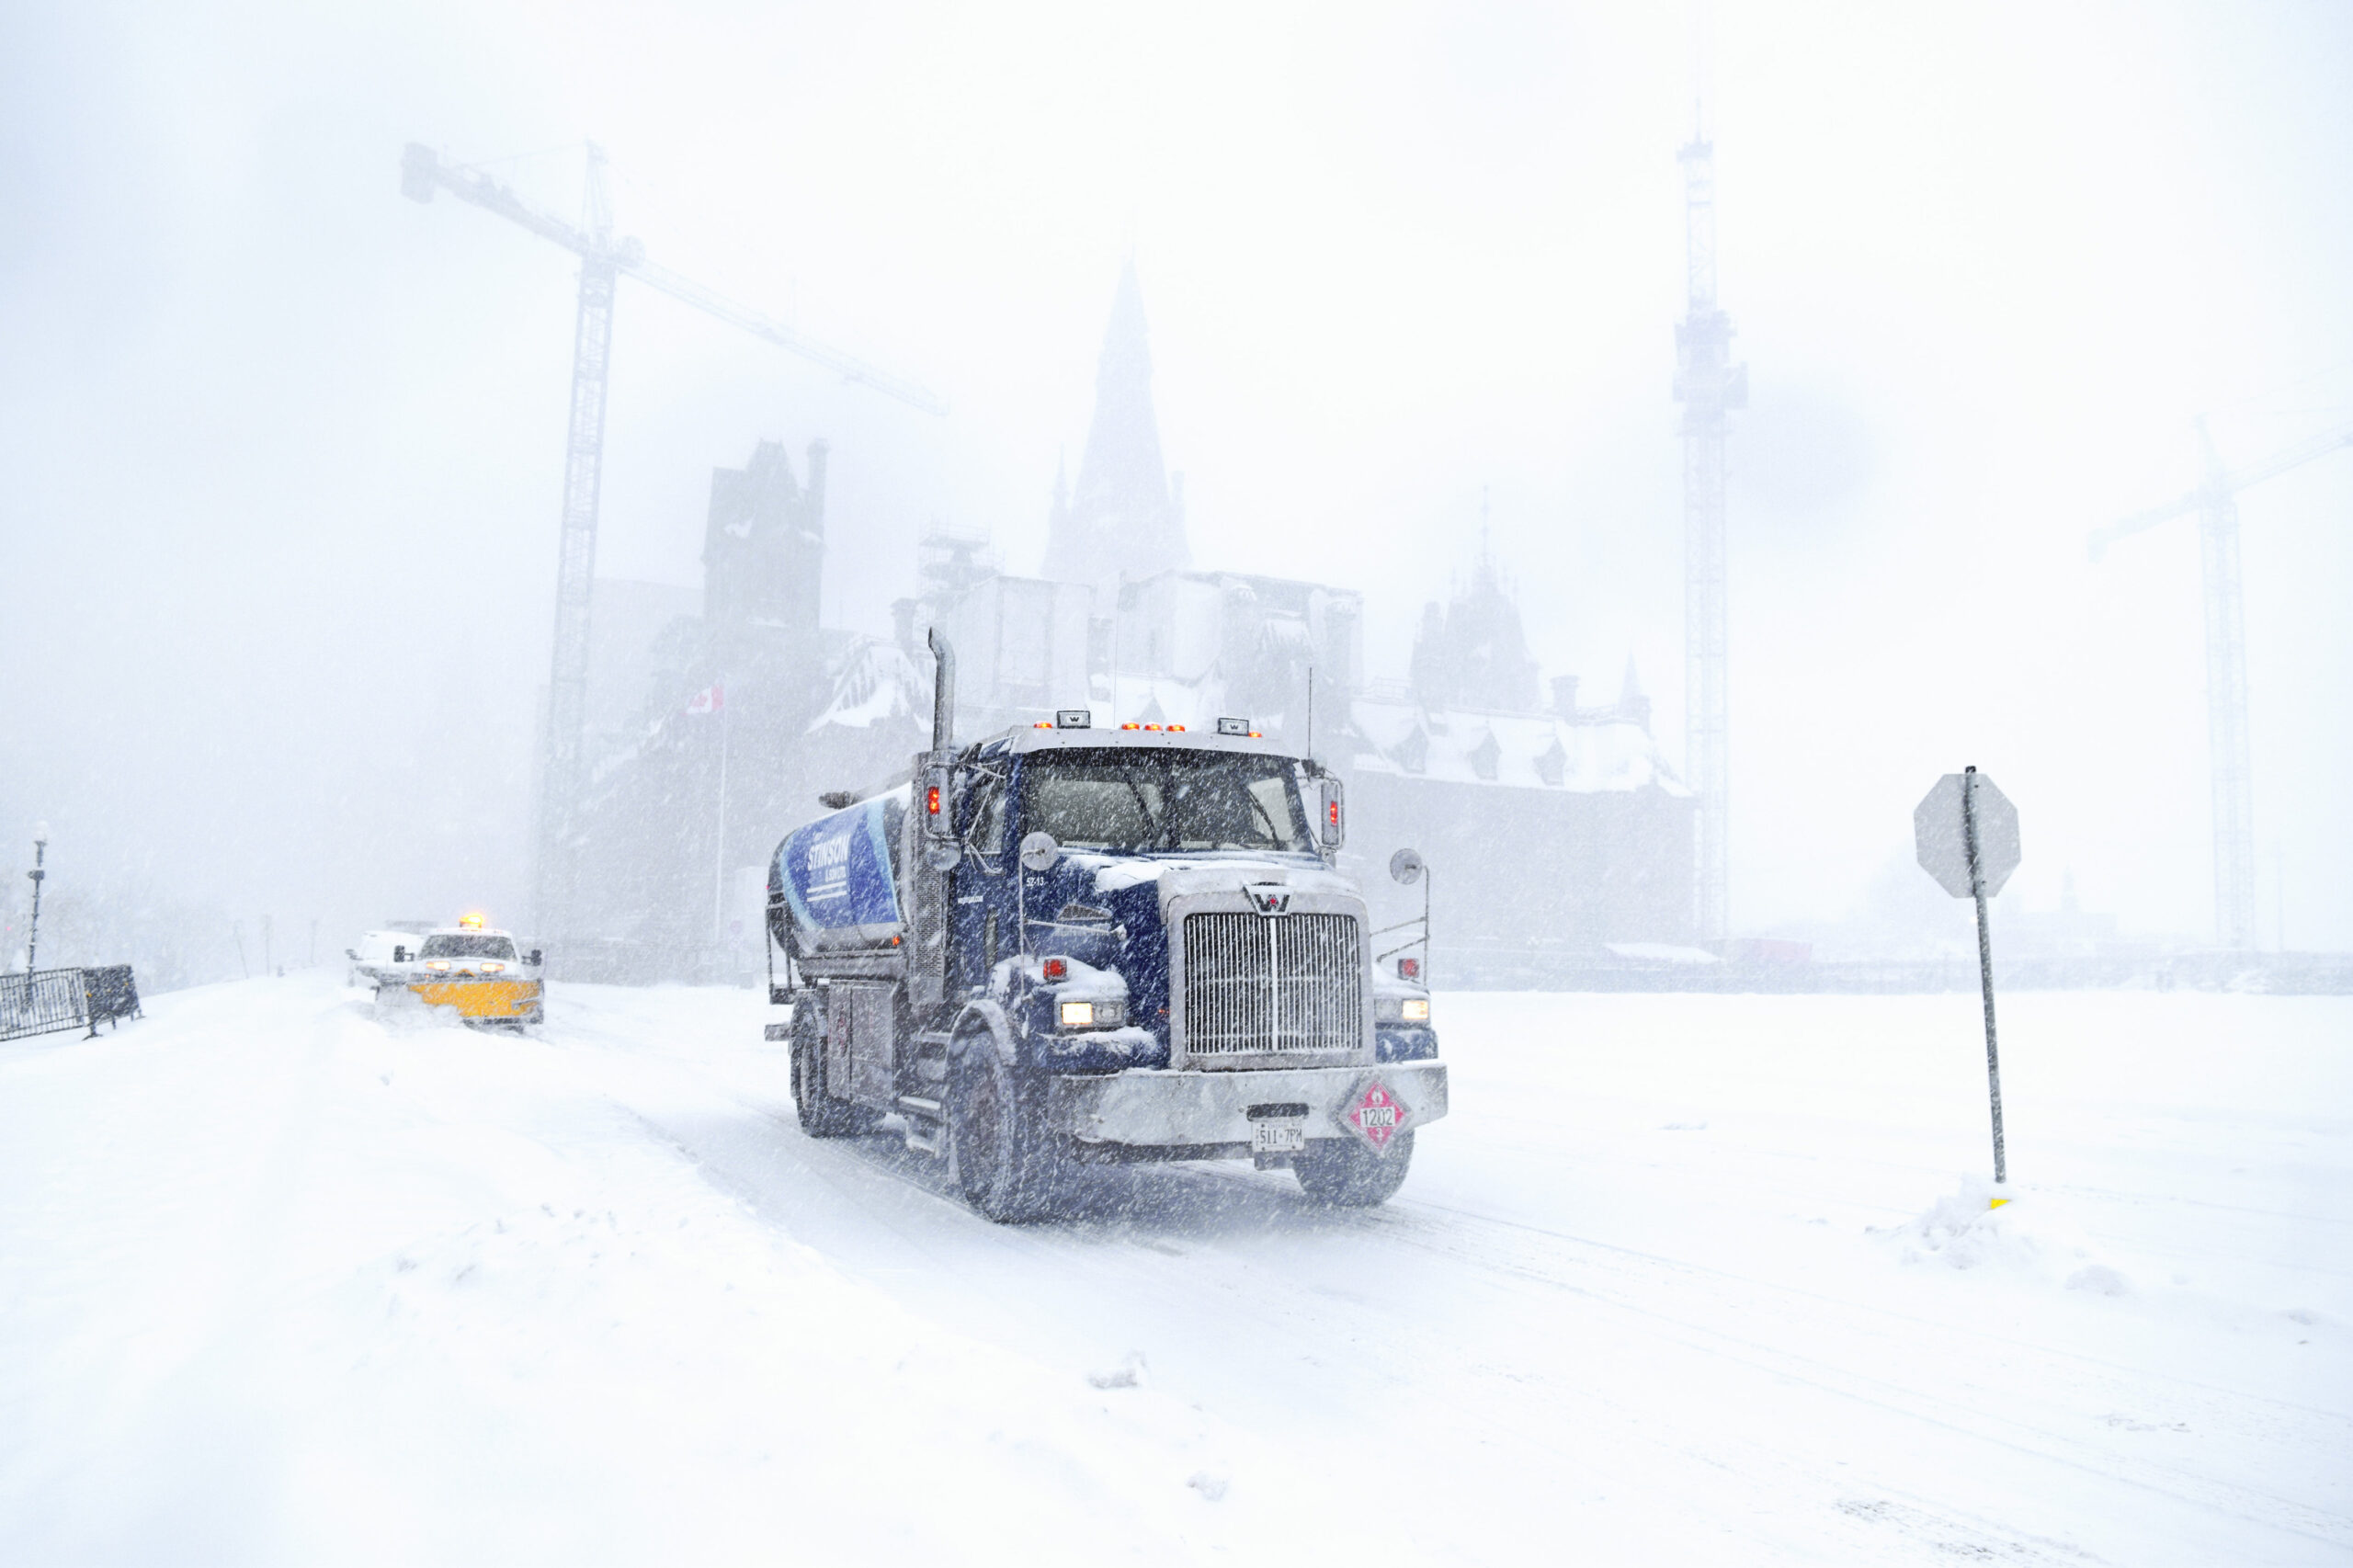 5 Maintenance Tips to Prepare Your Fleet for A Cold Winter